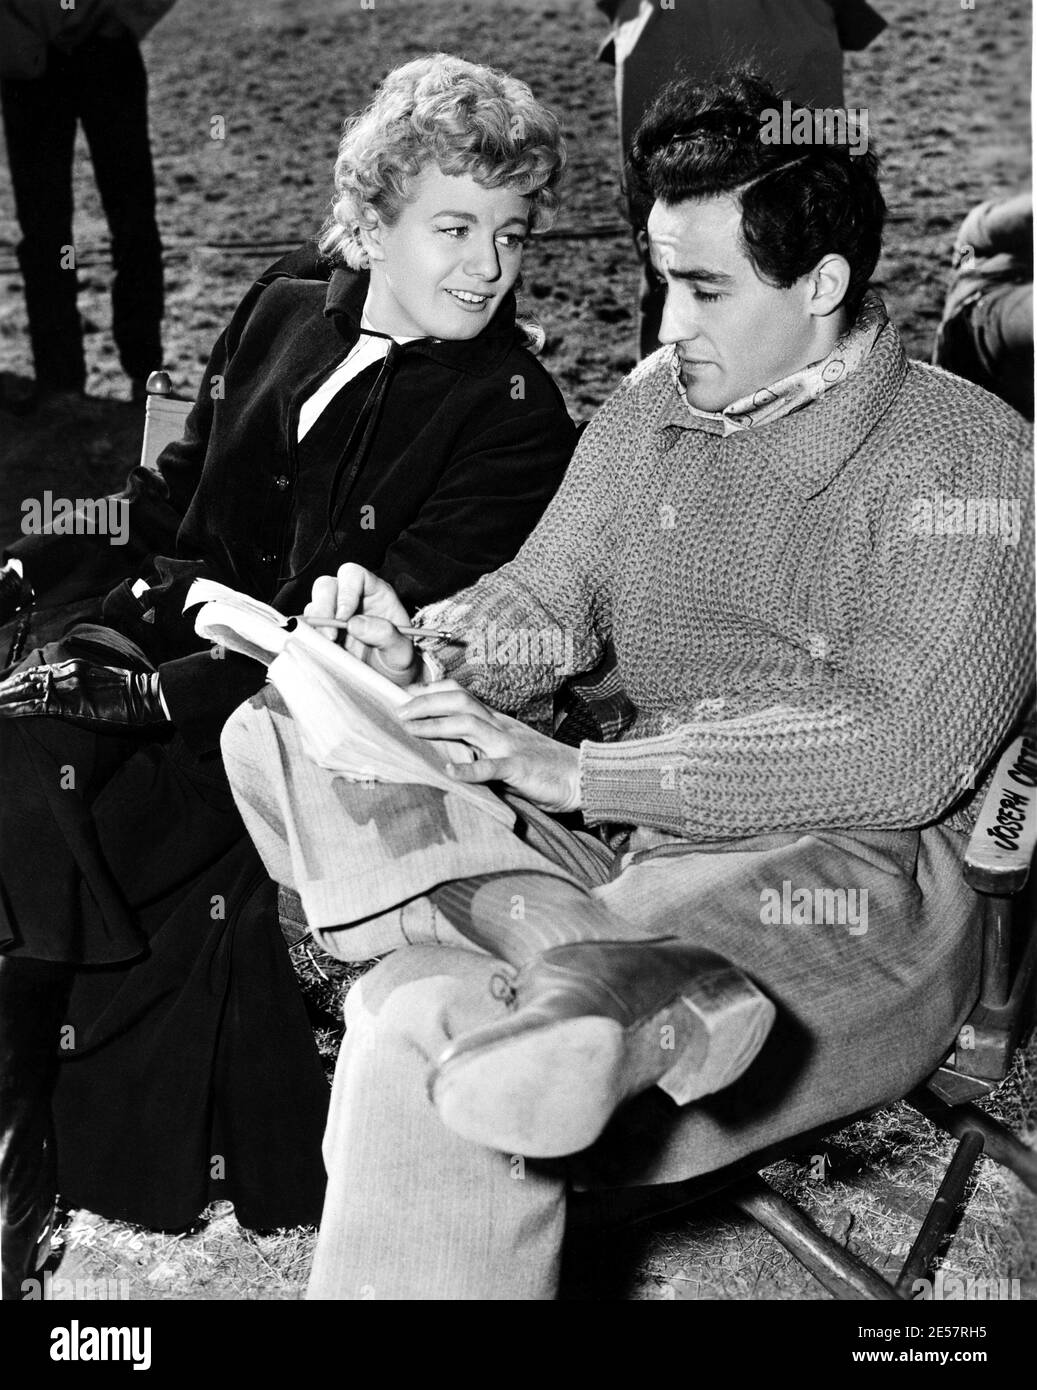 1951 c., USA : The movie actress  SHELLEY WINTERS ( 1922  - 2006 ) , with his housband , the celebrated  italian stage and movie actor VITTORIO GASSMAN  (   1922 - 2000 ) on the set of movie UNTAMED FRONTIER ( 1952 ) by Hugo Fregonese , photo by Universal International Studios - CINEMA - FILM -  smile - sorriso -bonldie - capelli biondi - bionda - blonde hair  - profile - profilo - candid still - tricot - maglione  di lana - wool ----   Archivio GBB Stock Photo